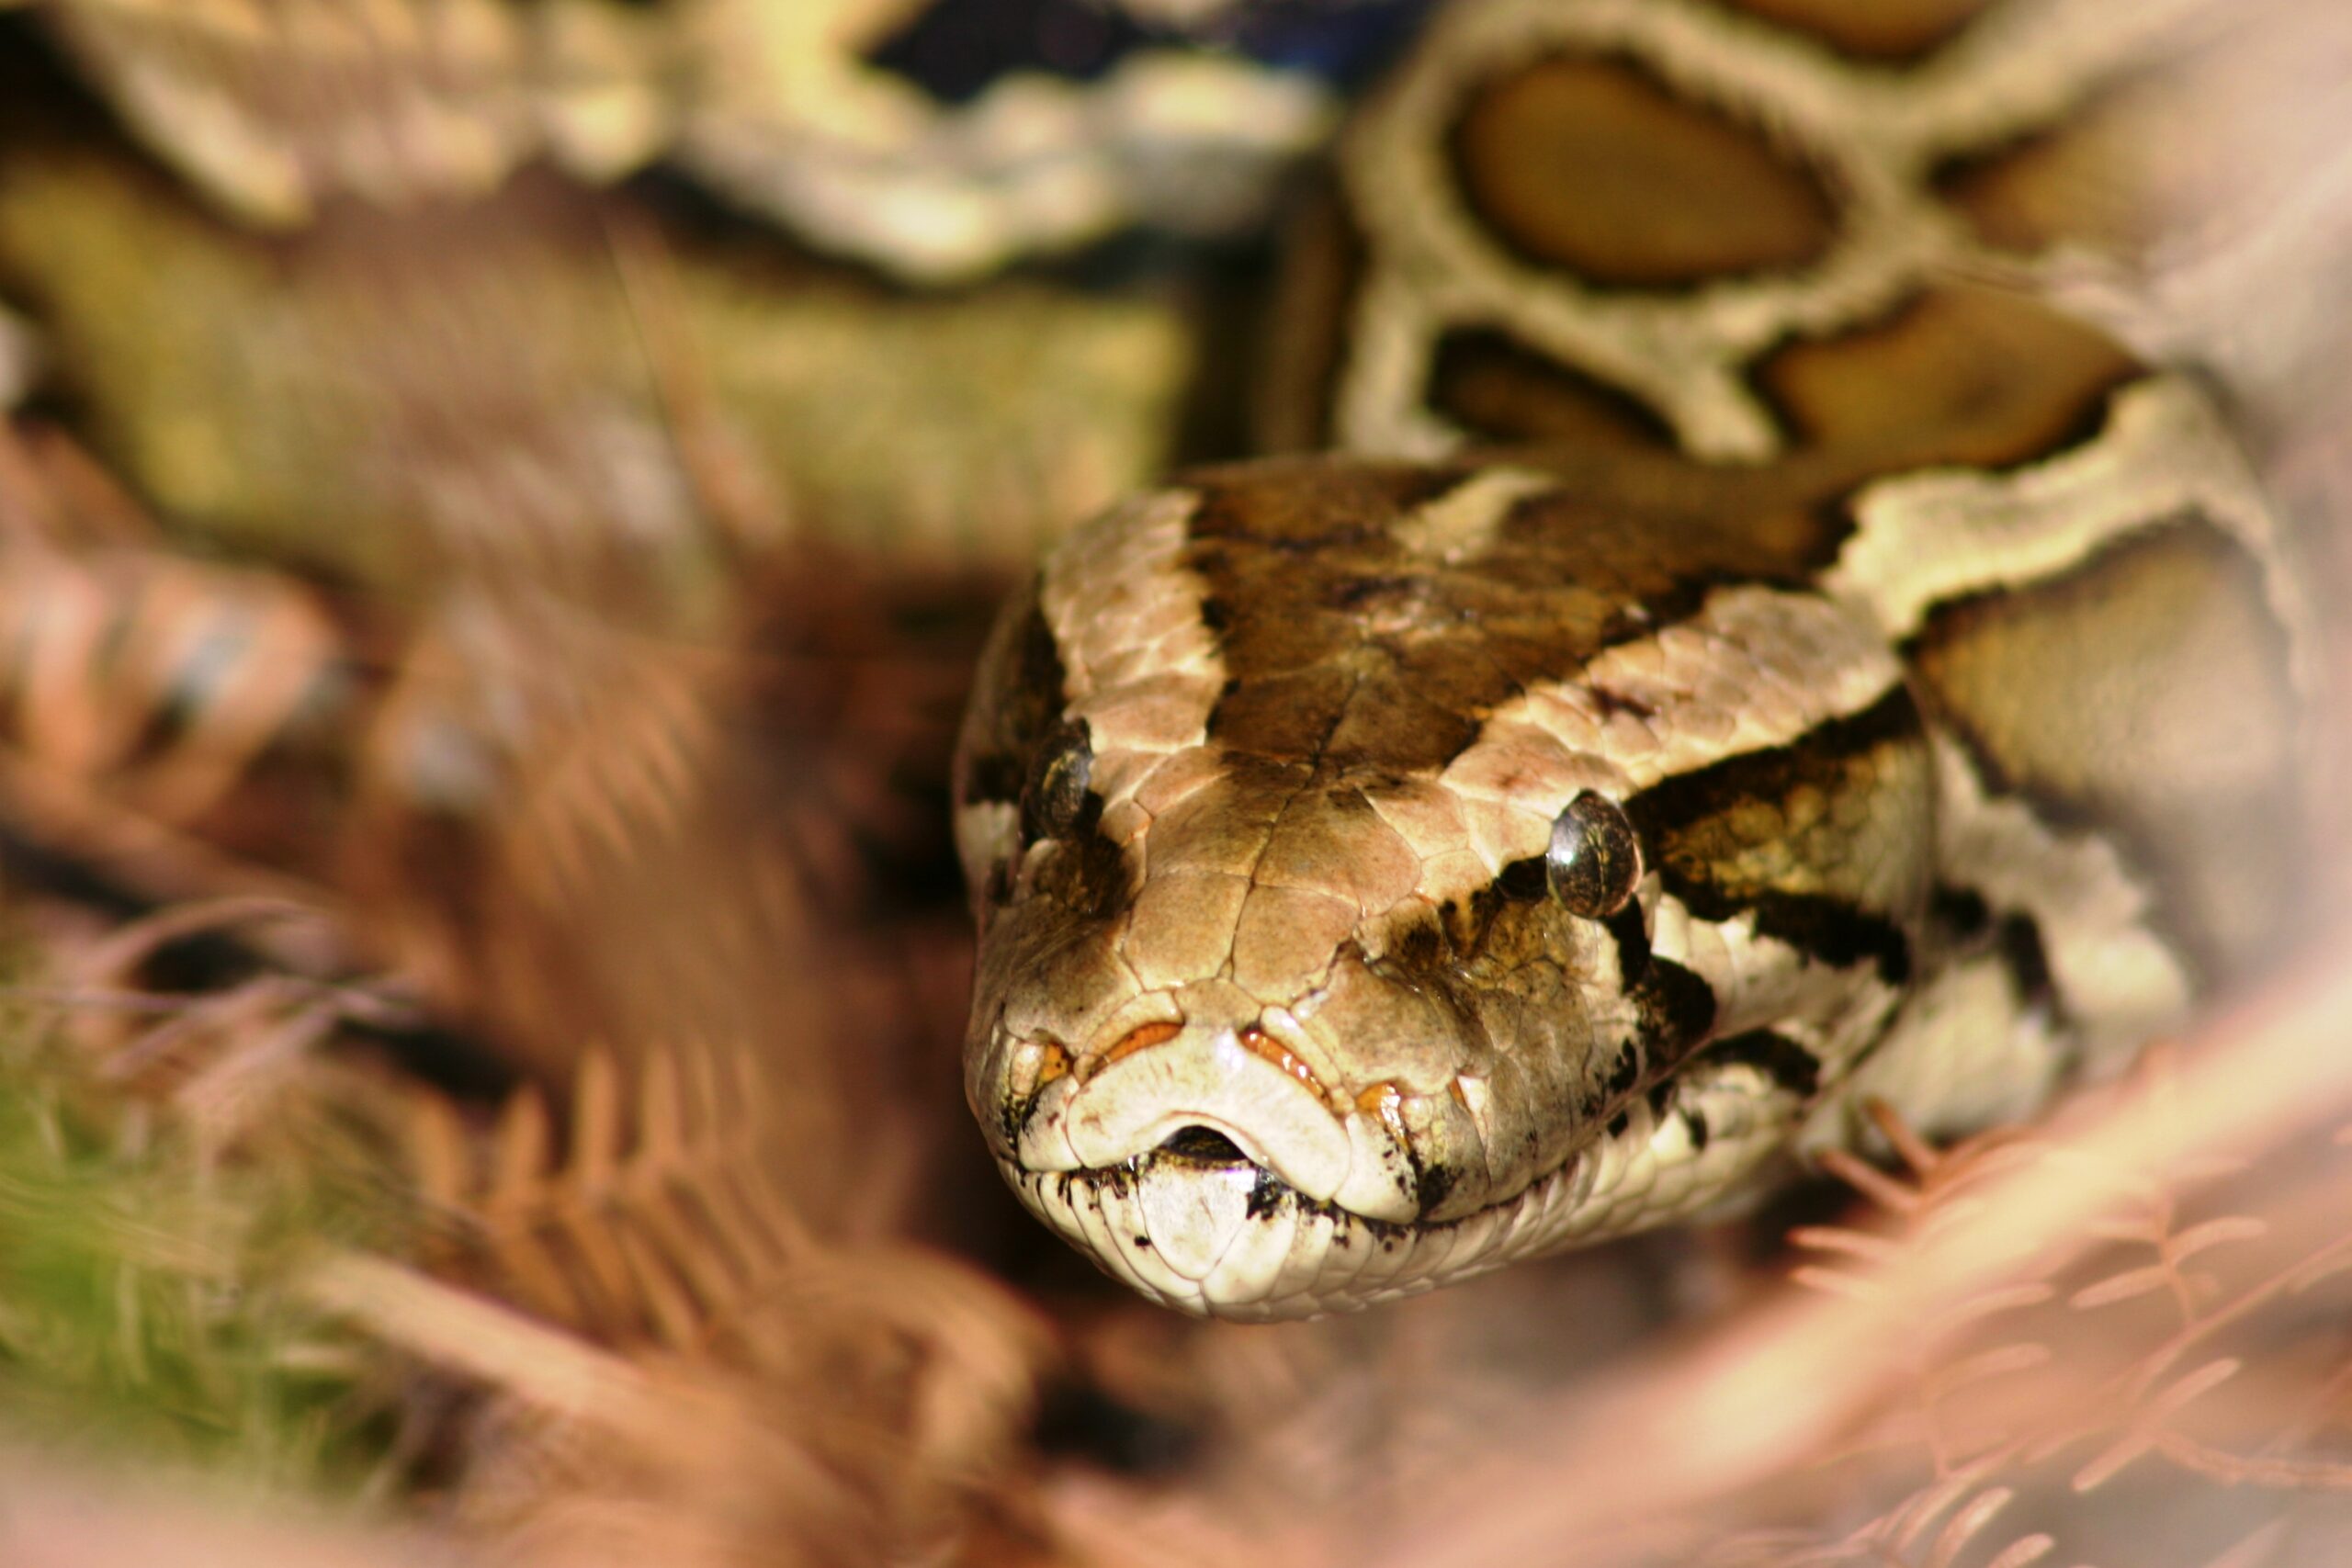 Burmese pythons are removed in the annual Florida Python Challenge.